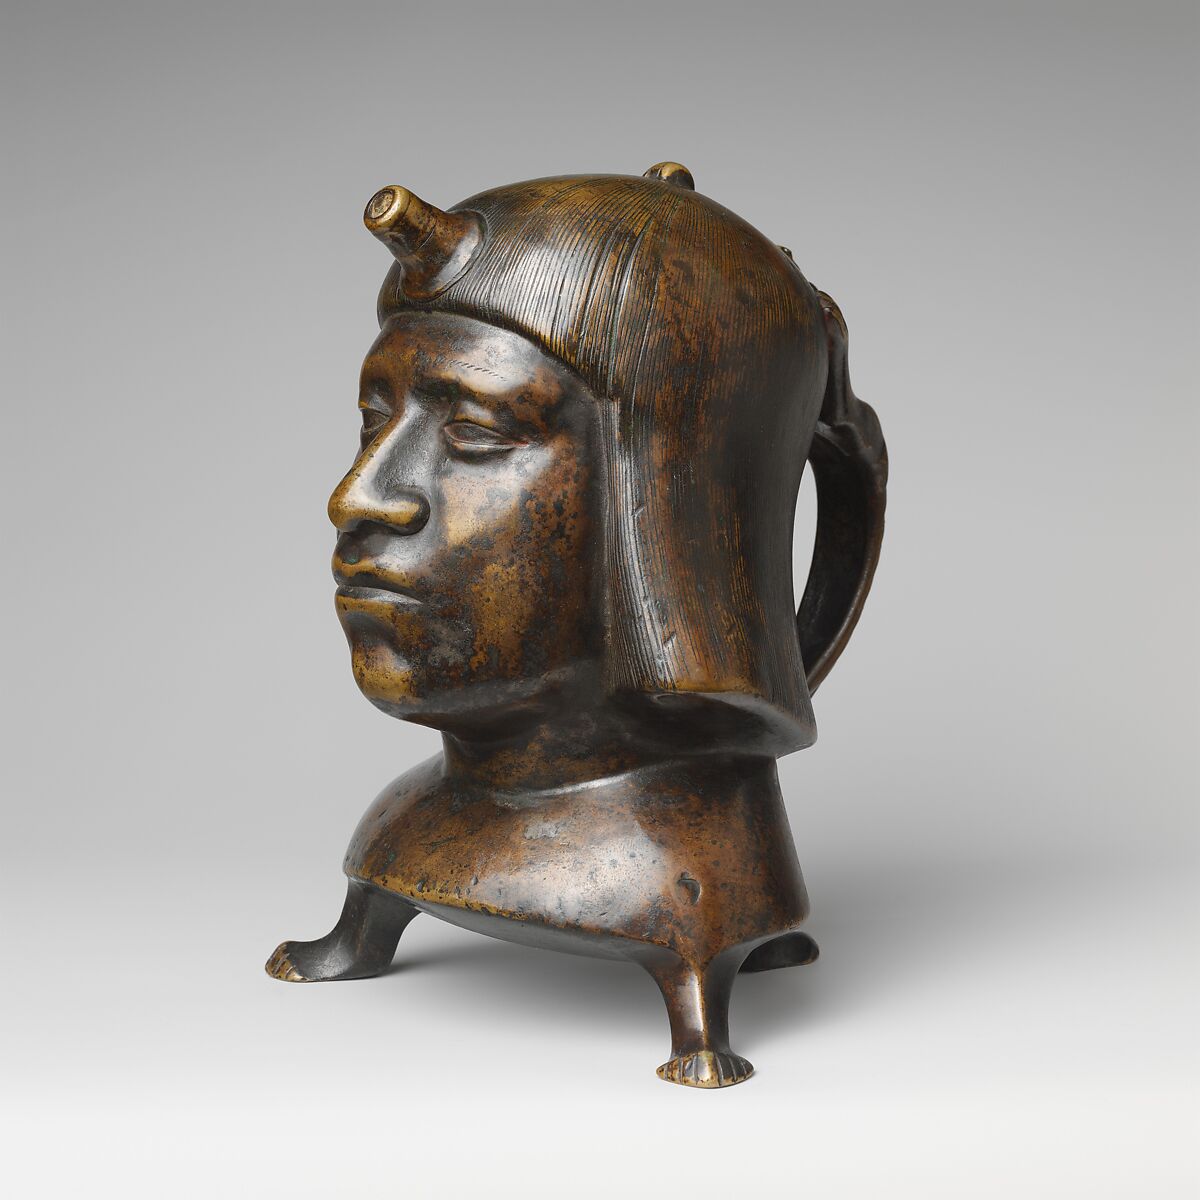 Aquamanile in the Form of a Human Head, Bronze; Ternary copper alloy with a very high percentage of zinc (approx. 68% copper,<br/>approx. 26% zinc, approx. 4% tin), covered with a thin black lacquer patina; traces of cinnabar have been detected on the interior and exterior of the vessel., German or French, Paris (in fourteenth-century Hildesheim style)